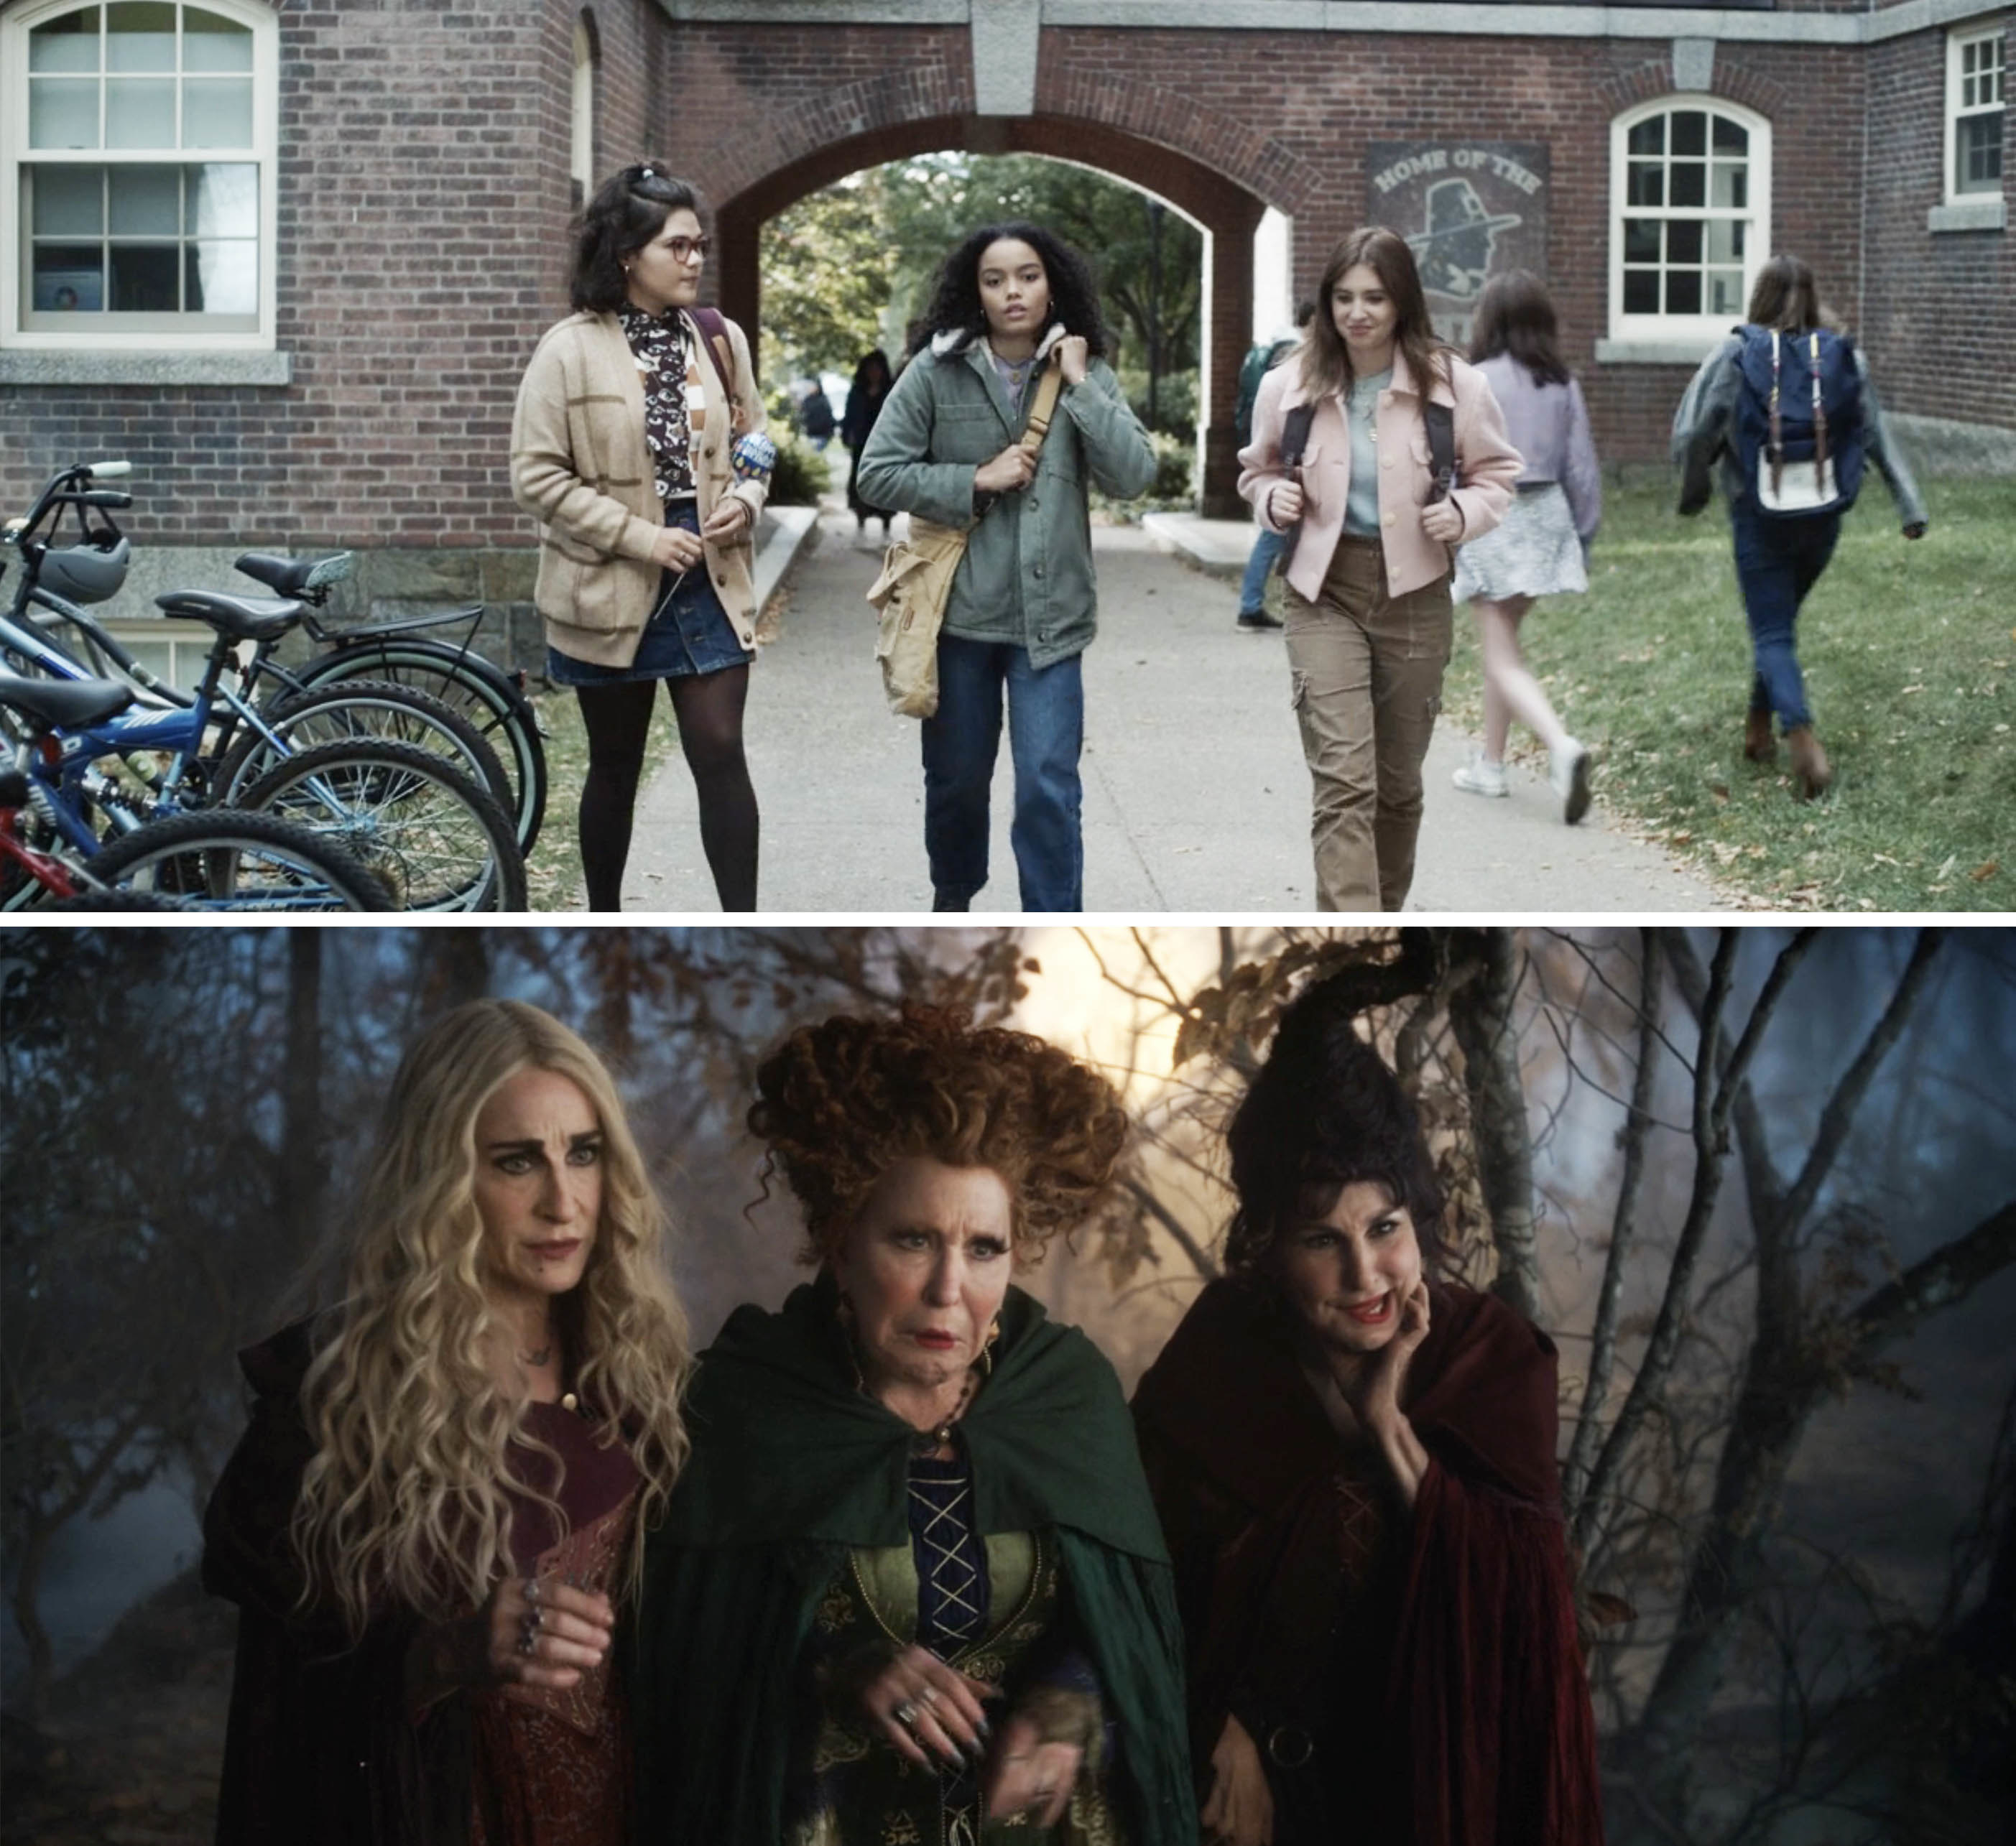 Becca, Izzy, and Cassie as young girls and as the Sanderson sisters